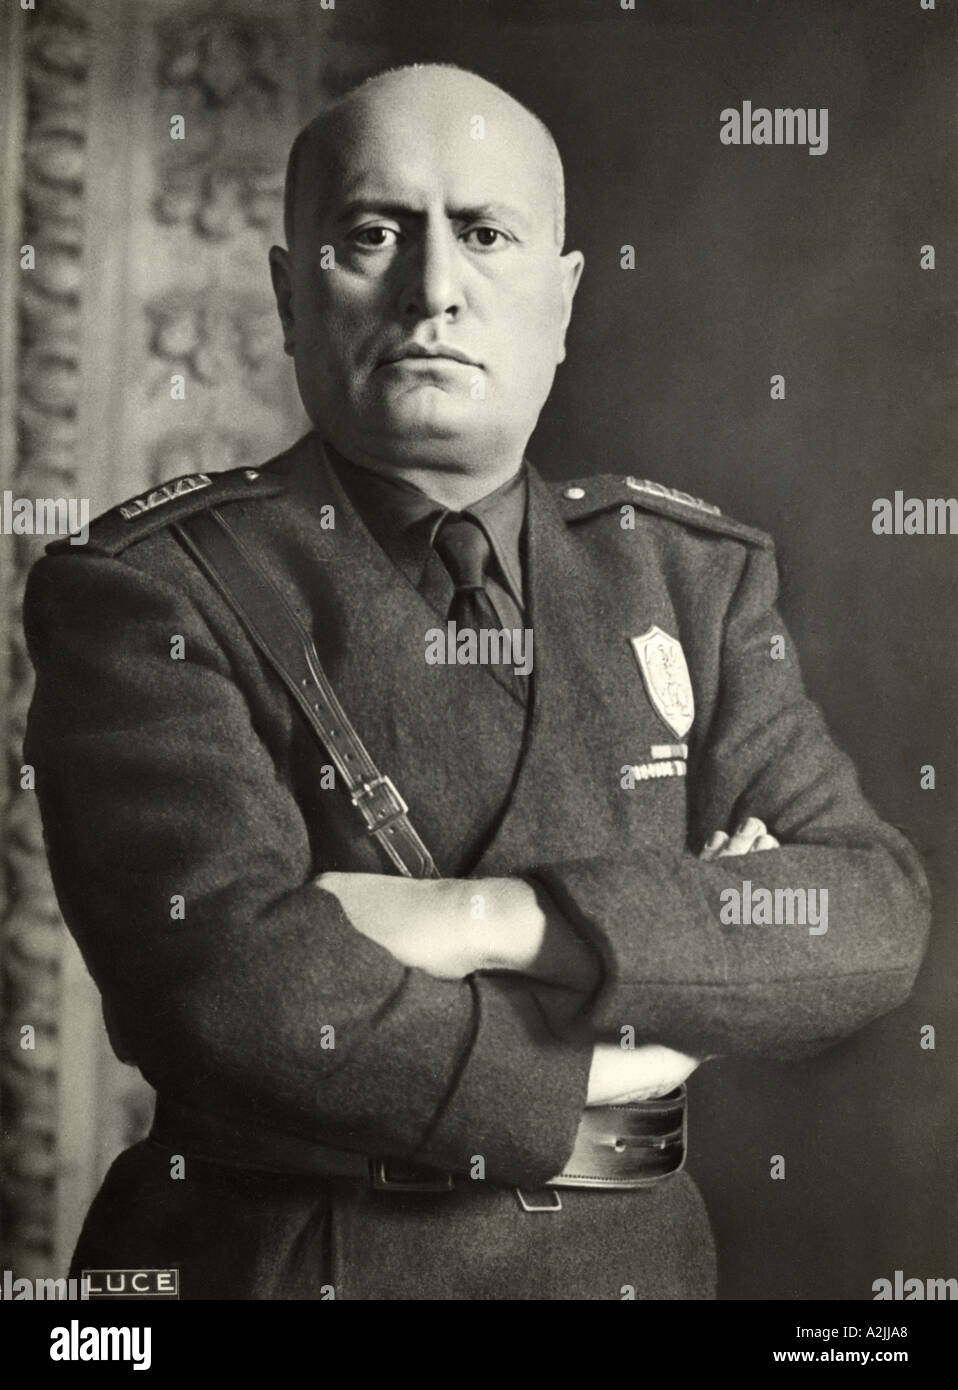 Benito Mussolini Stock Photos Benito Mussolini Stock Images Alamy Images, Photos, Reviews